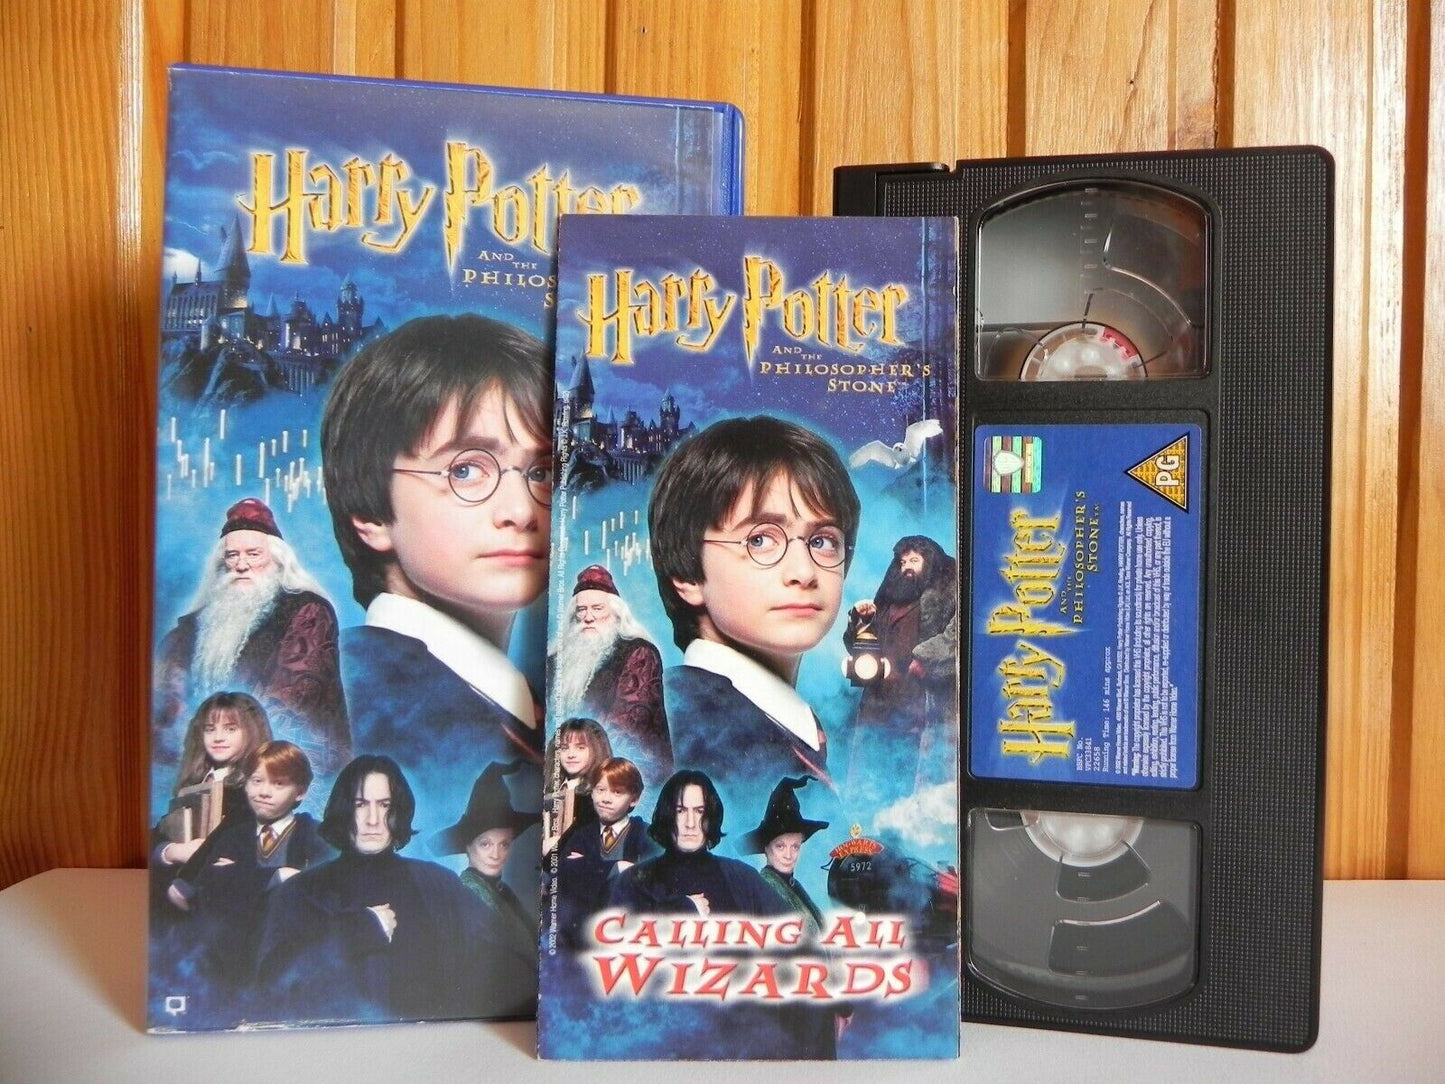 Harry Potter And The Philosopher's Stone - Warner Home - Fantasy - Kids - VHS-